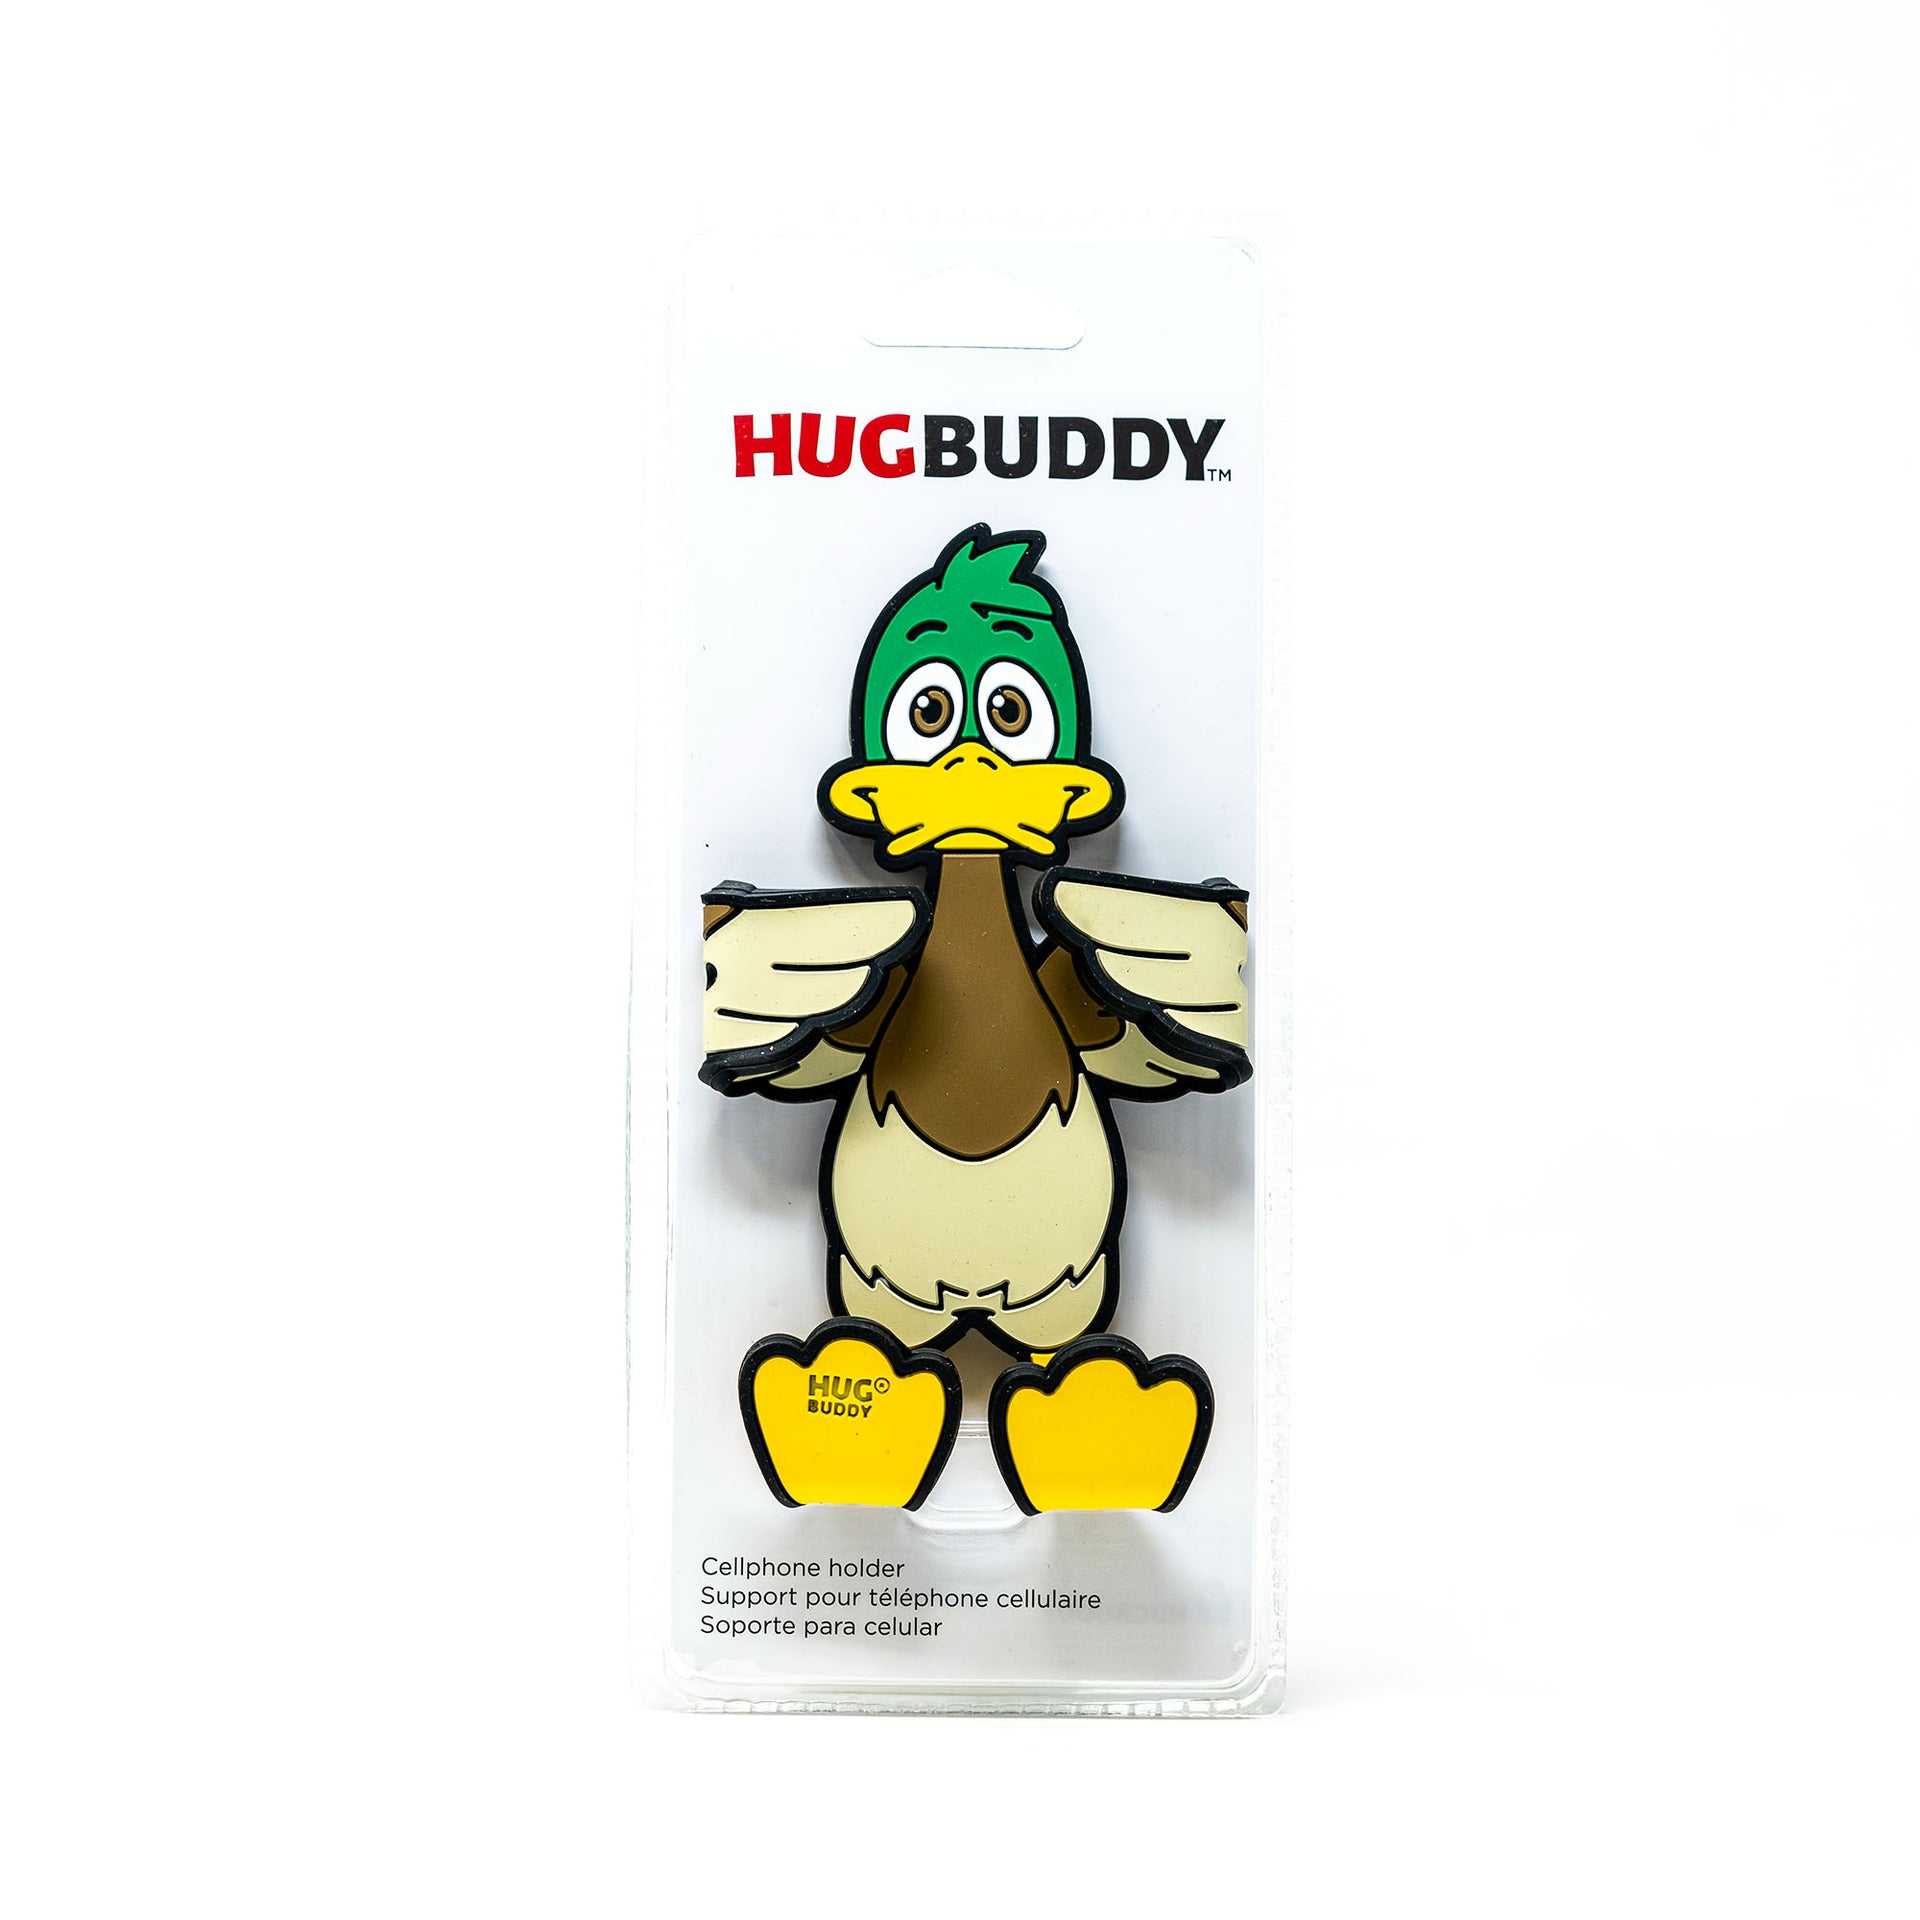 Image of Crumbs the duck Hug Buddy packaging front view